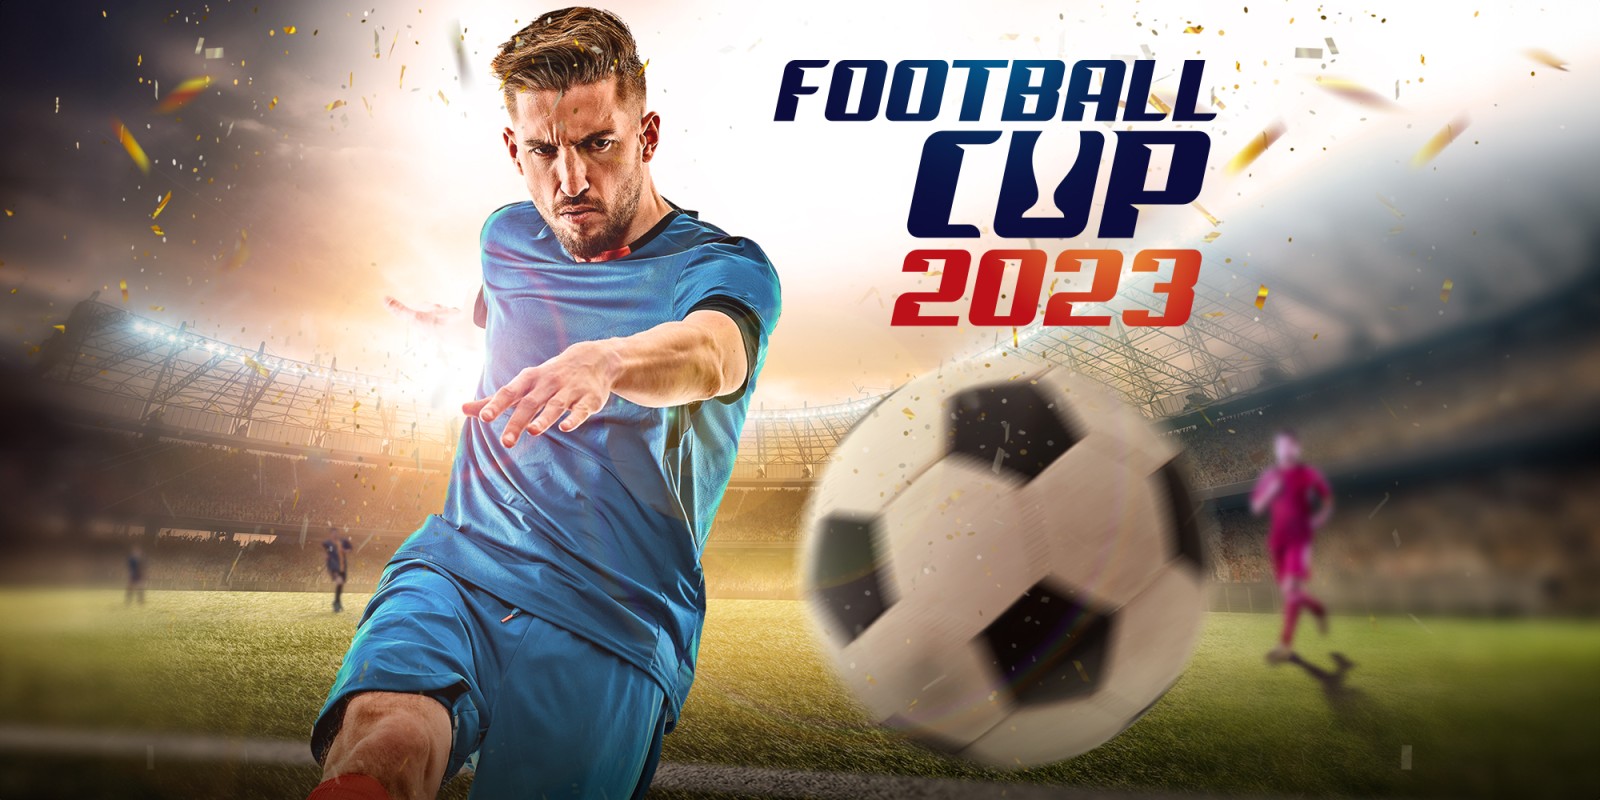 Football Cup 2023 Nintendo Switch Download-Software Spiele Nintendo